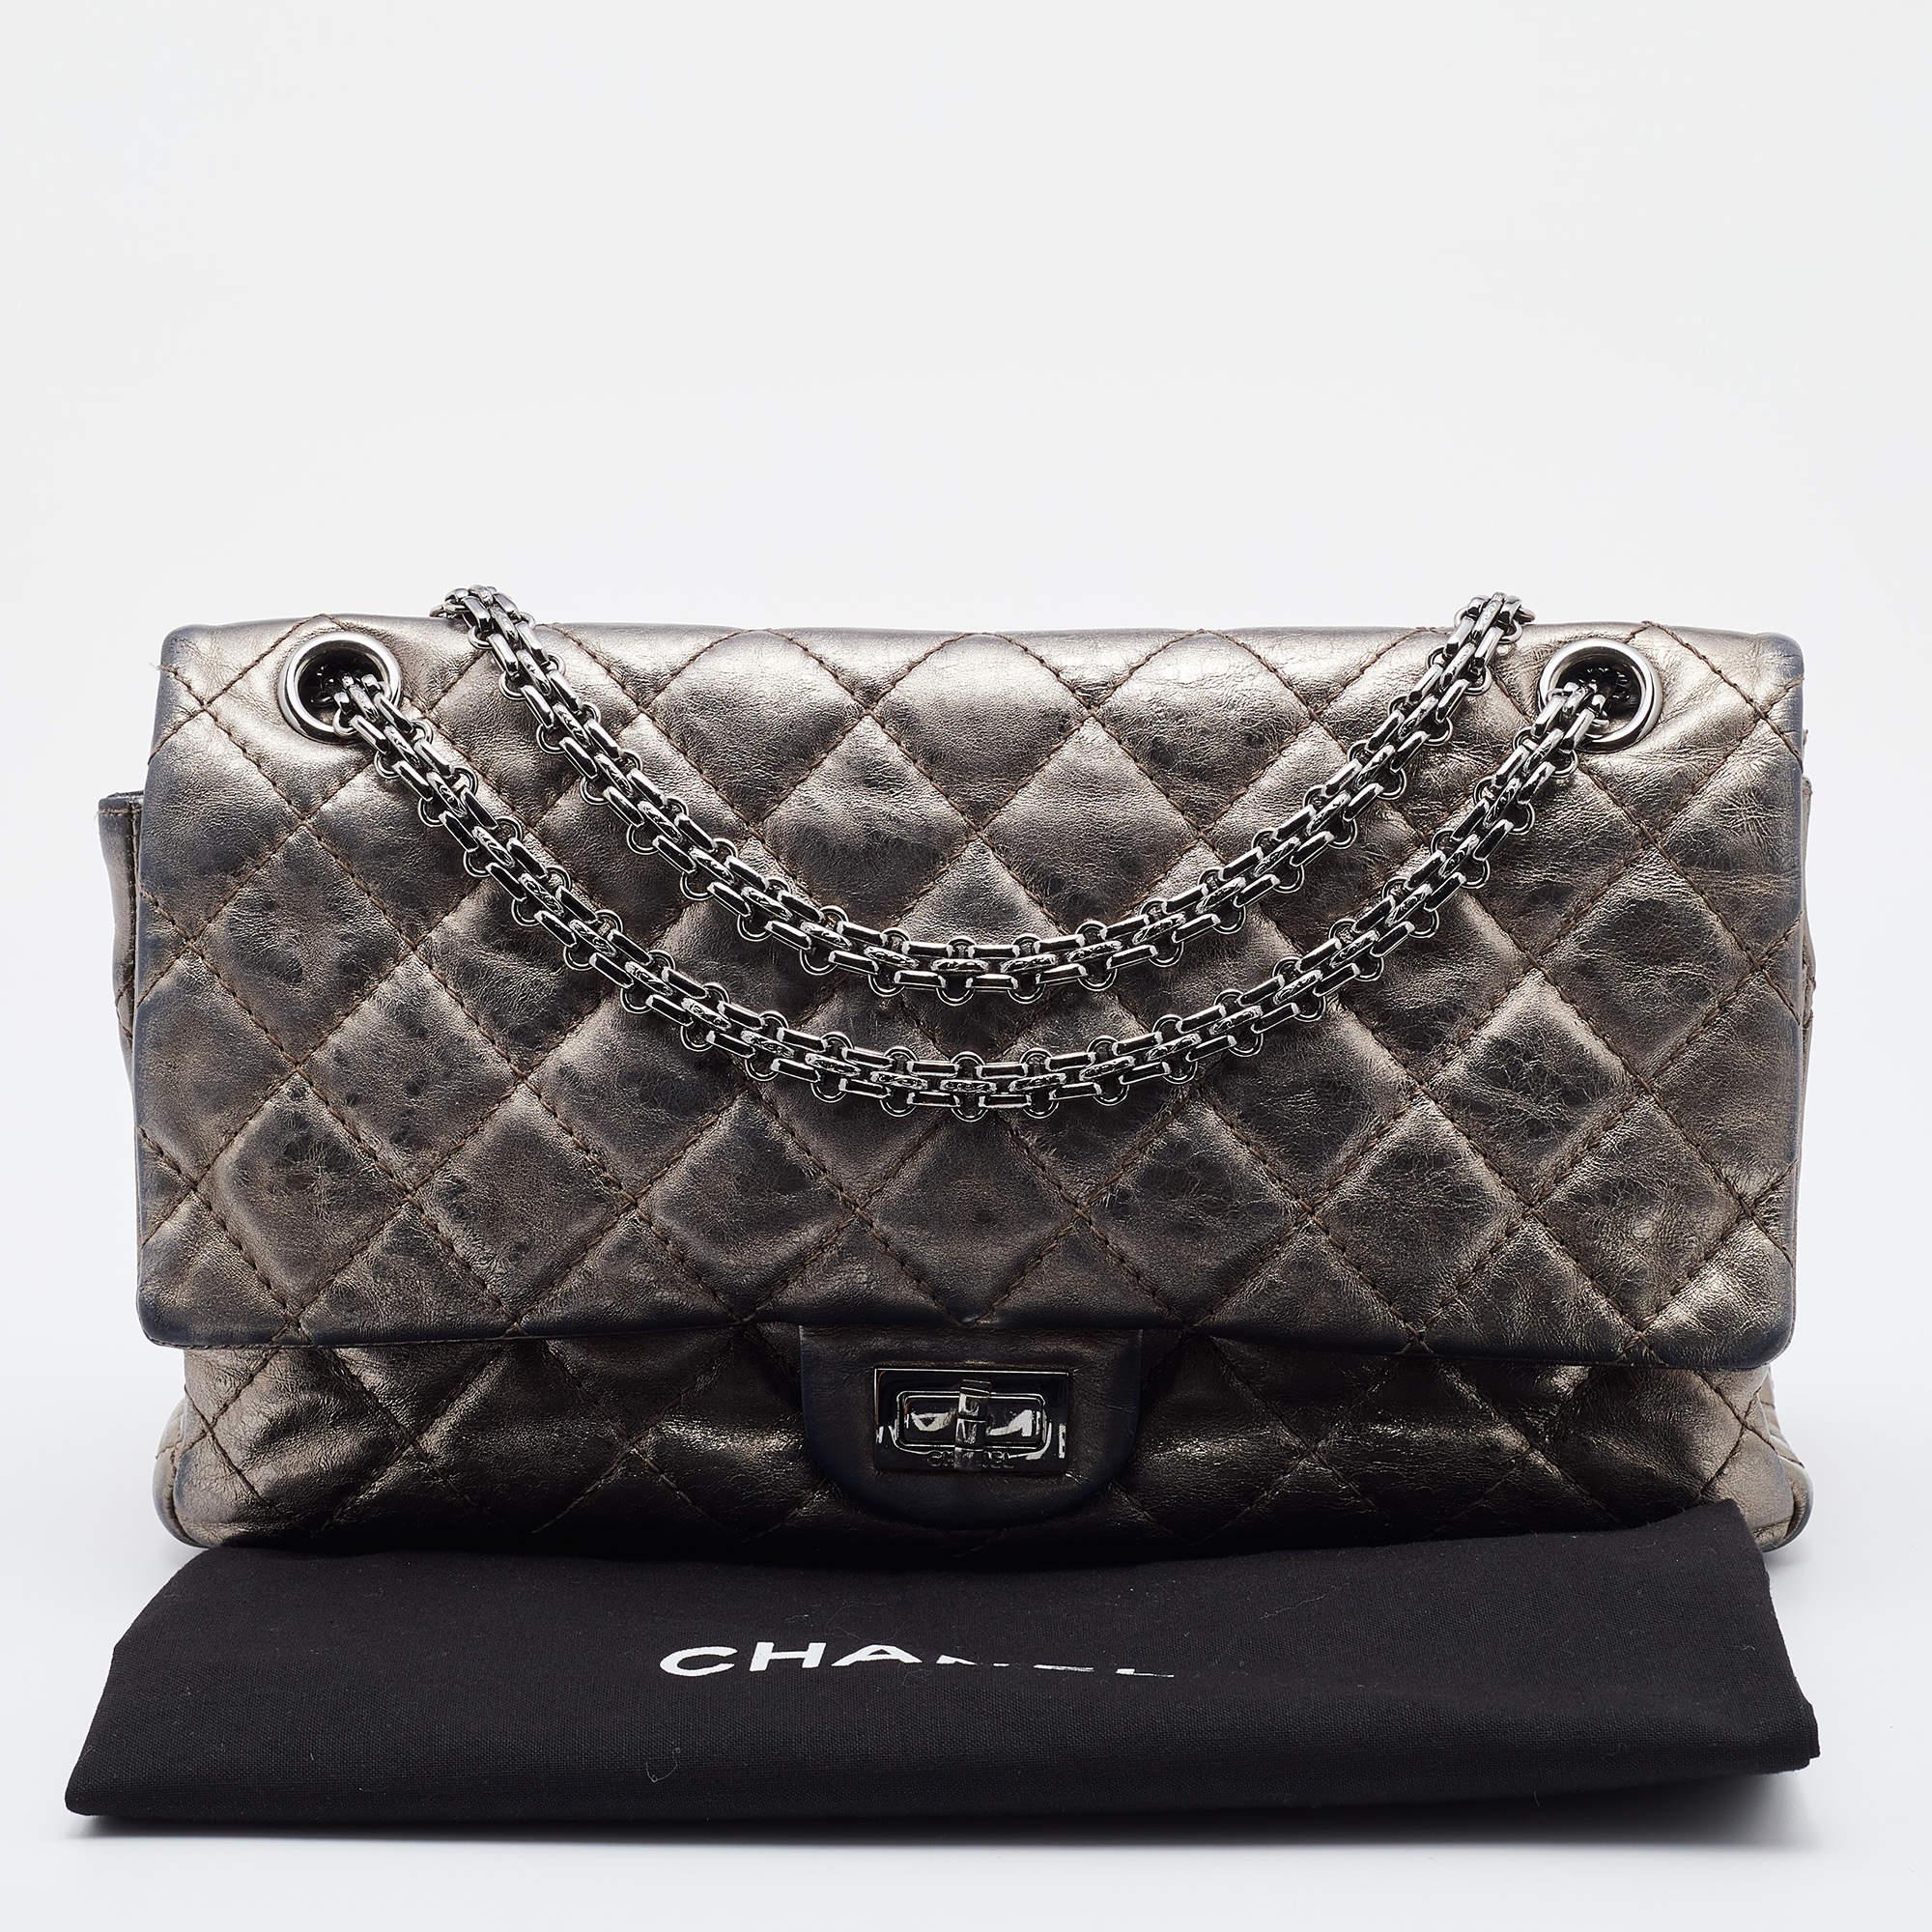 Chanel Metallic Grey Quilted Leather Reissue 2.55 Classic 226 Flap Bag For Sale 7